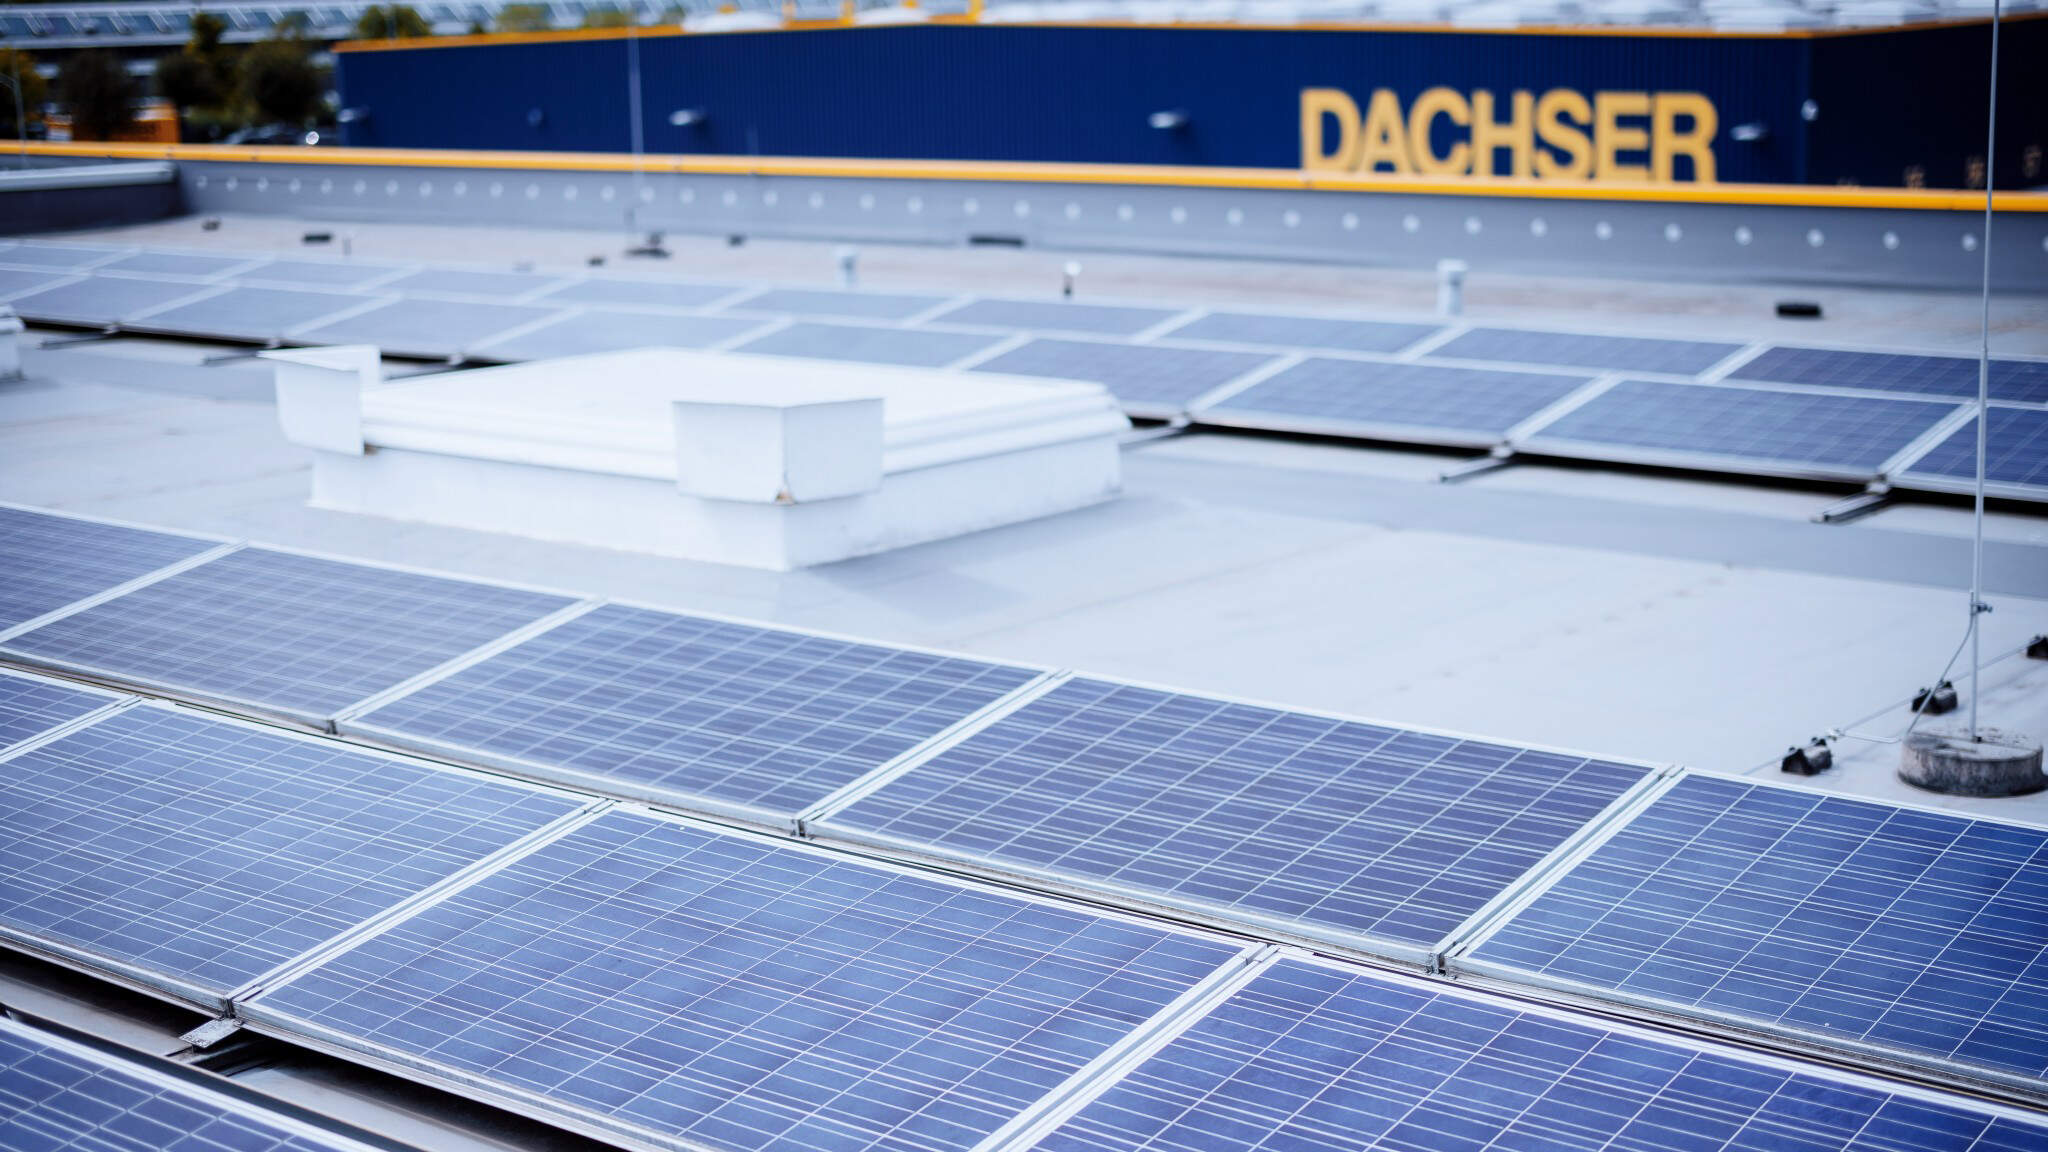 Solar panels on our logistics facilities contribute to energy efficiency.